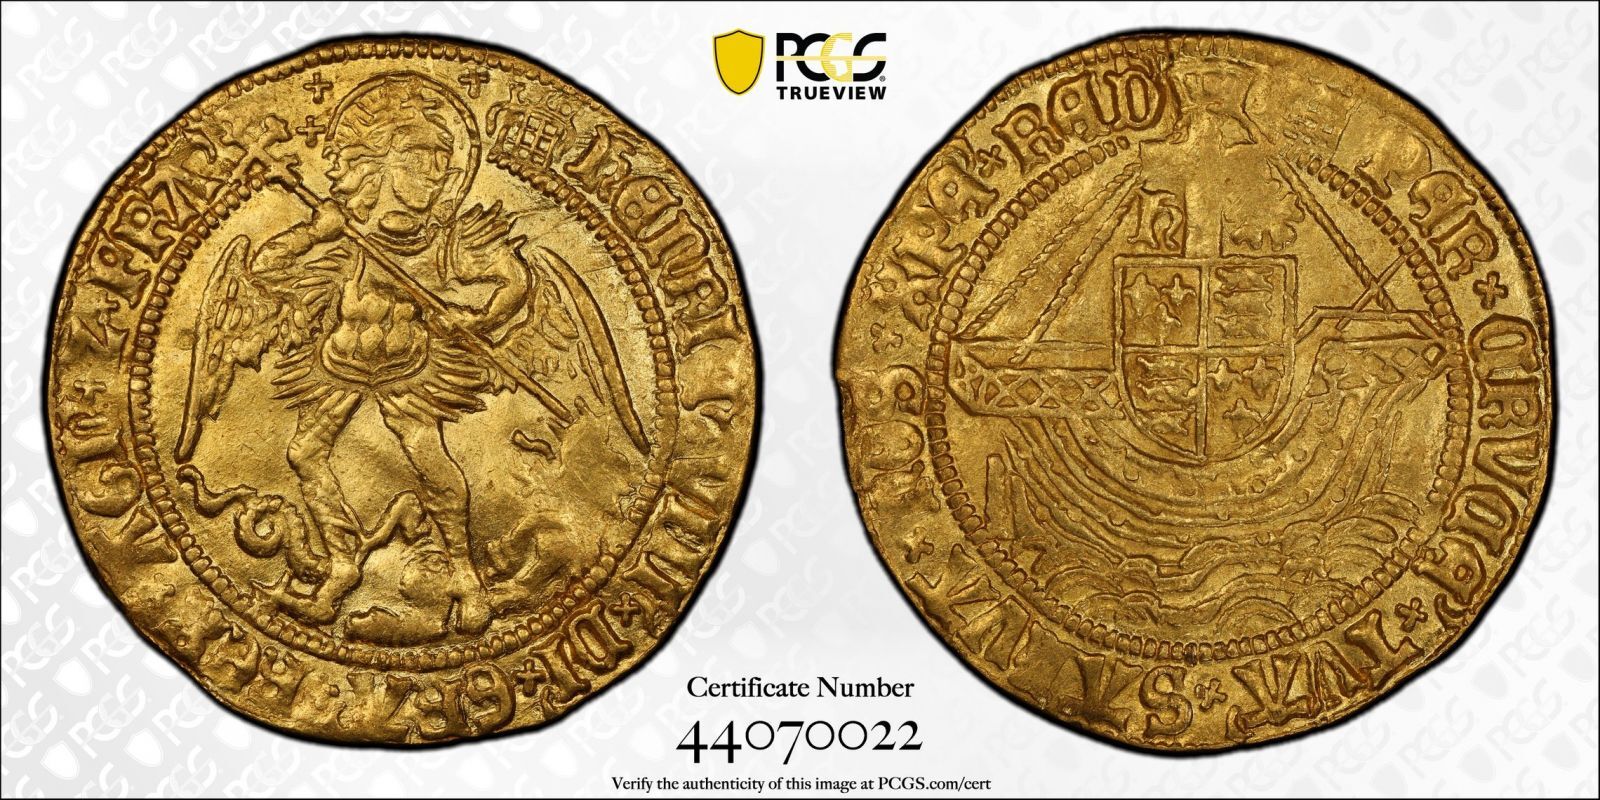 Lot 6: ND (1509-1526) Gold Angel Equal-finest PCGS MS63 #44070022